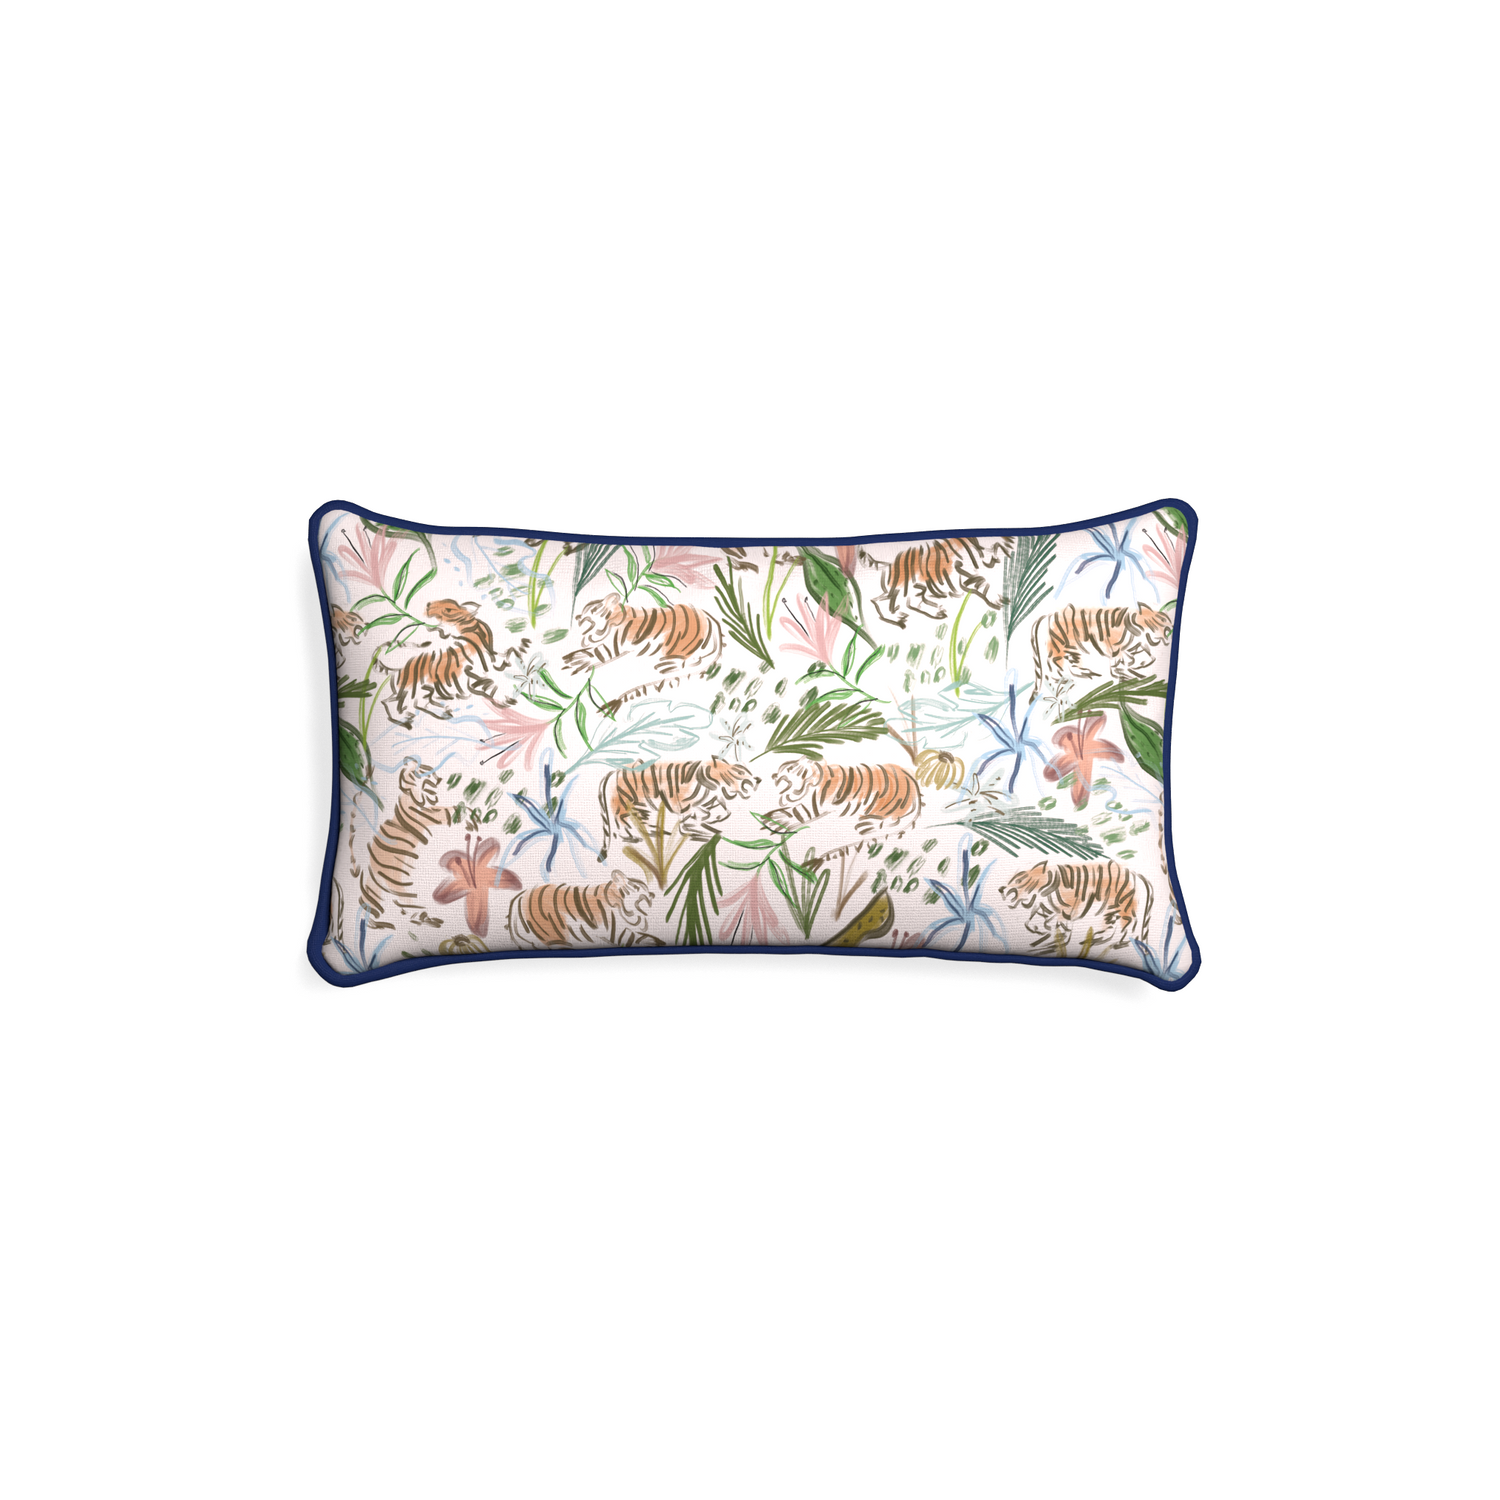 Petite-lumbar frida pink custom pink chinoiserie tigerpillow with midnight piping on white background